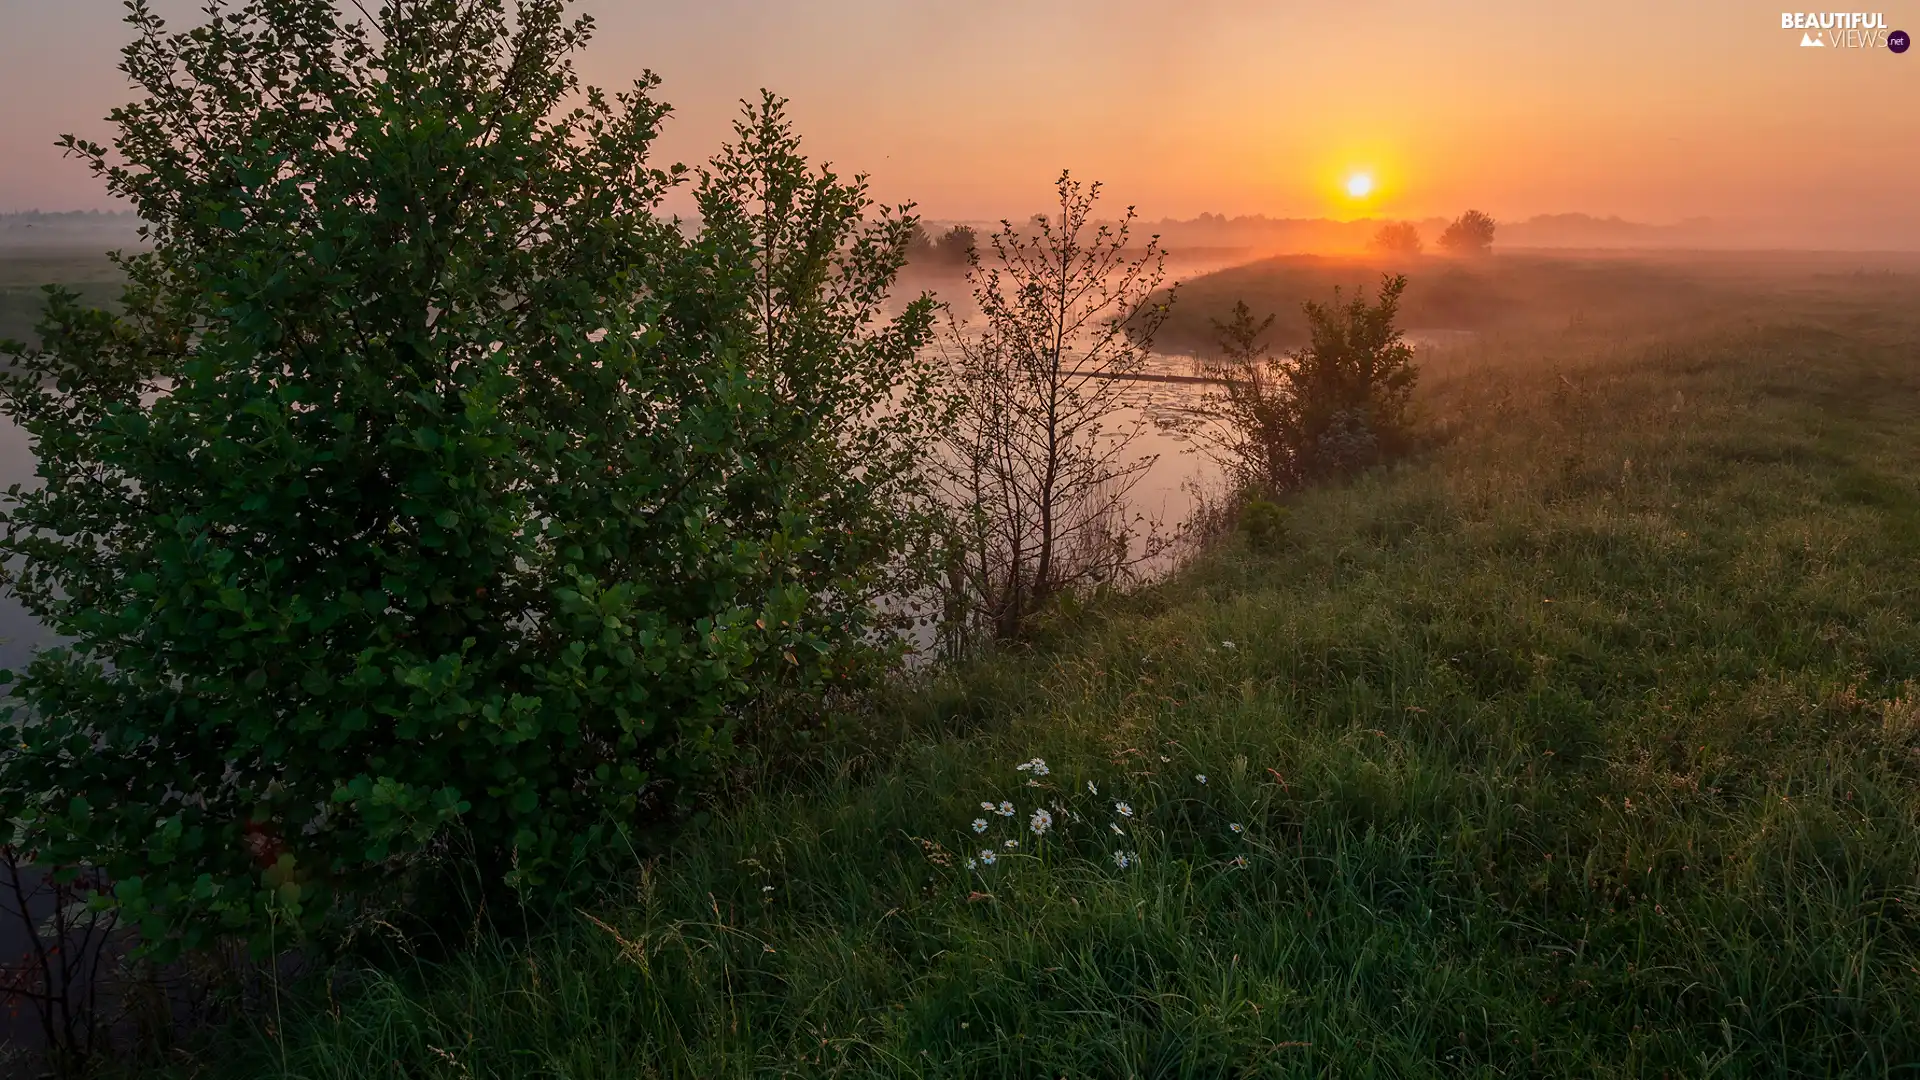 camomiles, grass, trees, Flowers, River, Great Sunsets, viewes